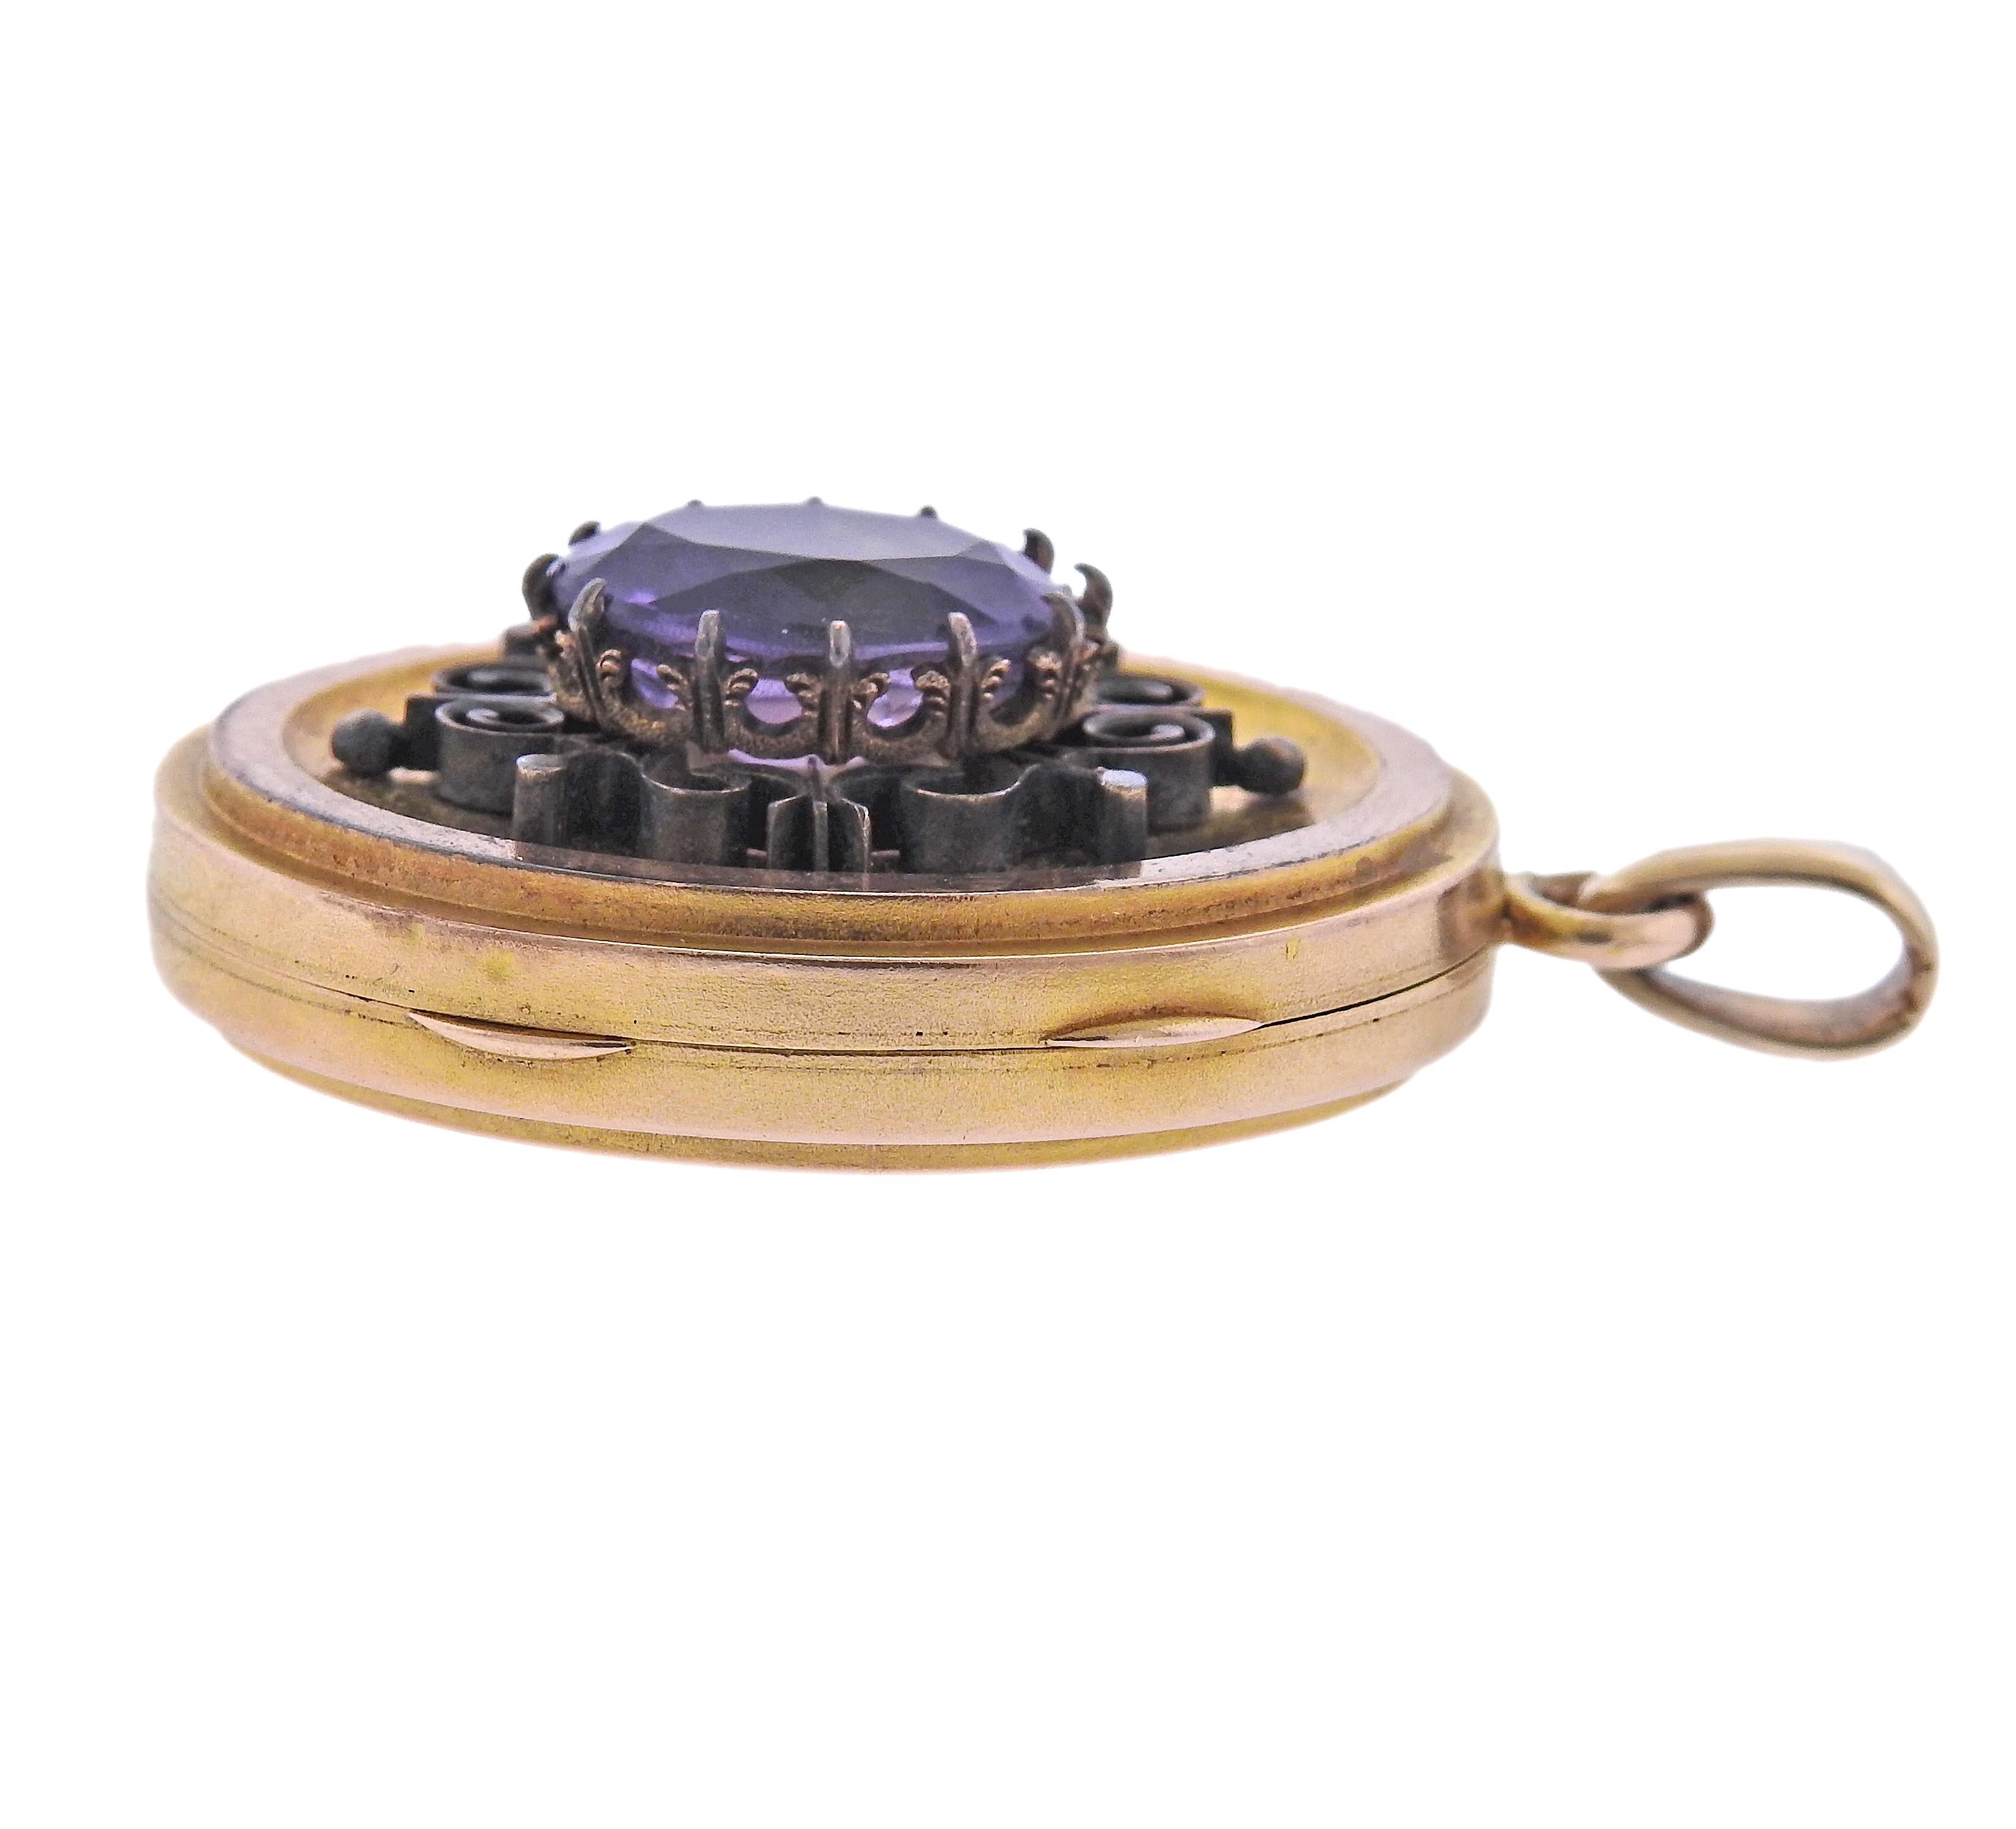 Antique Victorian 14k gold locket pendant, with center oval amethyst. Pendant is  47mm x 27mm, tarnish on pendant is present.  weight - 18 grams.